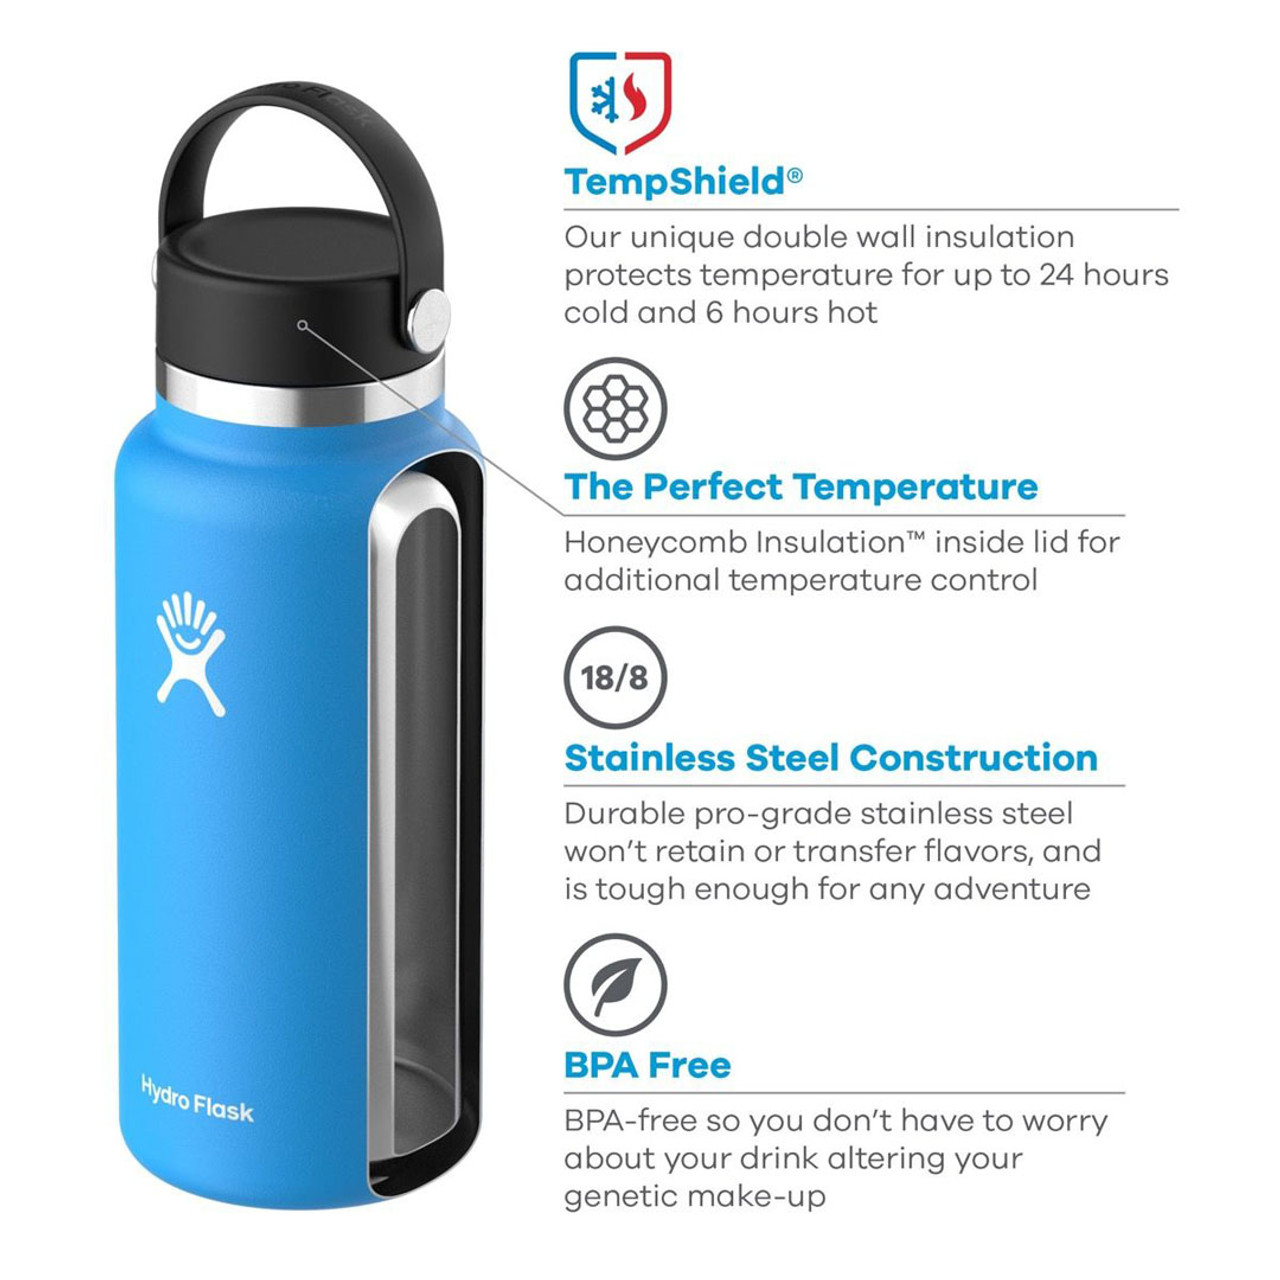 https://cdn11.bigcommerce.com/s-ppsyskcavg/images/stencil/1280x1280/products/60171/200187/hydro-flask-technology-wide-mouth2_1_1_16_1_2__79500.1659452788.jpg?c=2?imbypass=on